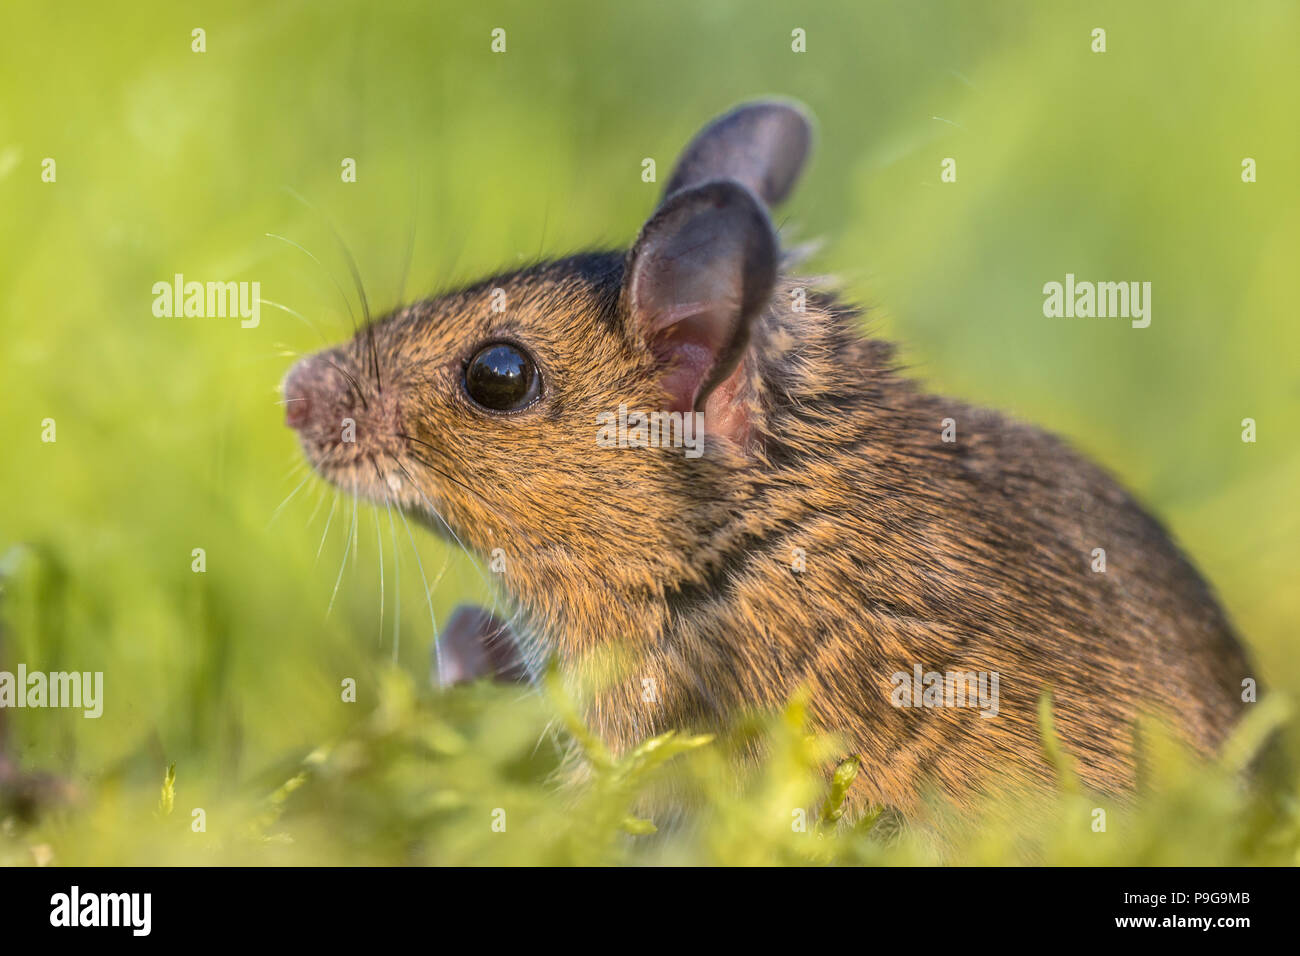 Head of Cute Wood mouse (Apodemus sylvaticus) looking out of green moss natural environment Stock Photo